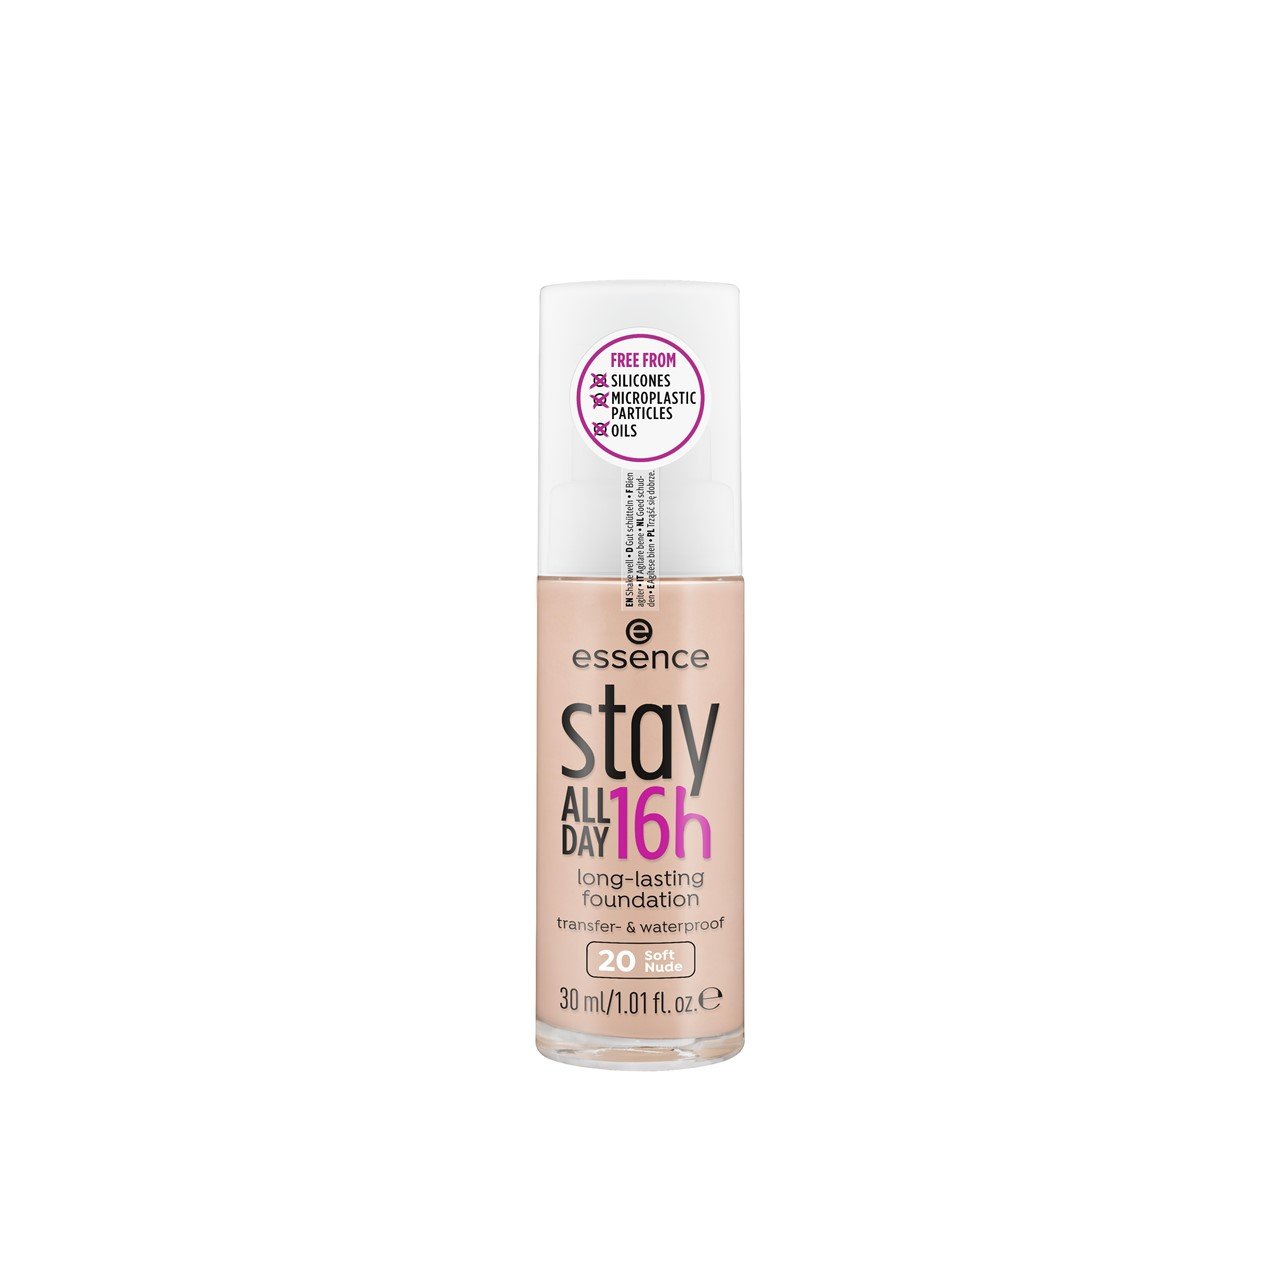 essence Stay All Day 16h Long-Lasting Foundation 20 Soft Nude 30ml